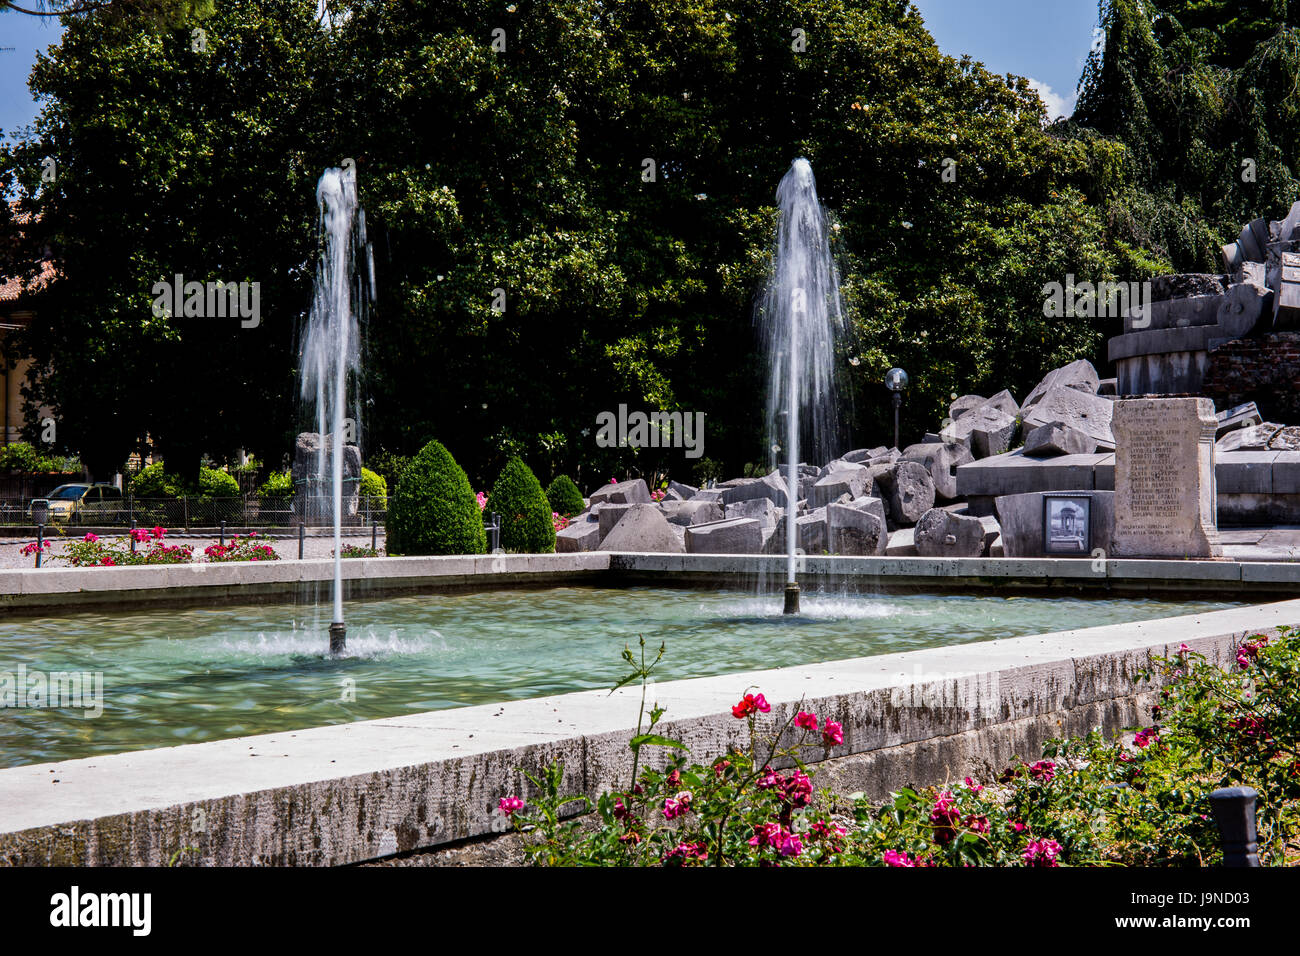 Fountain decorating the park with stone monument in the background Stock Photo